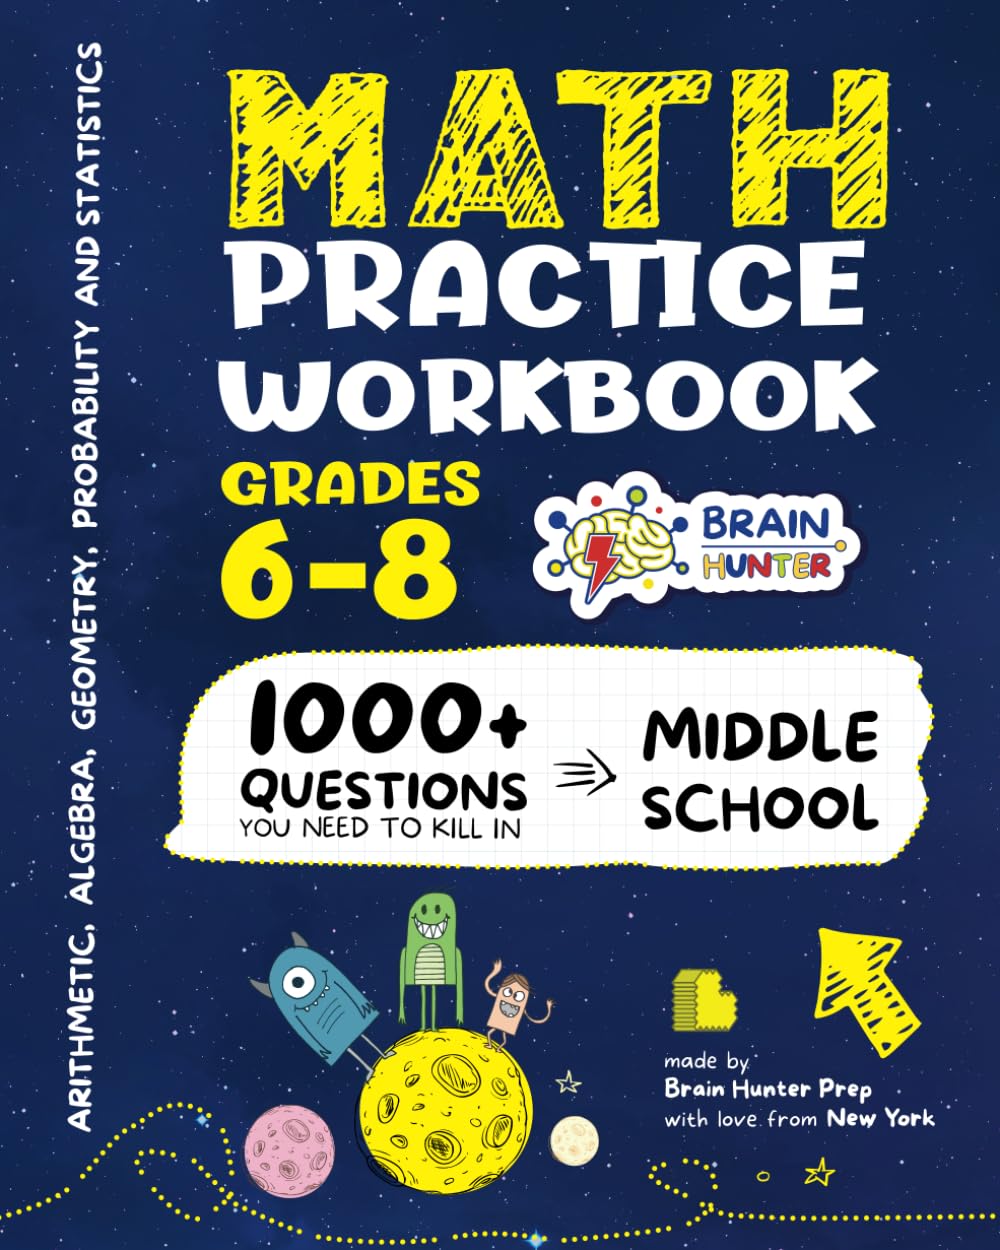 Math Practice Workbook Grades 6-8: 1000+ Questions You Need to Kill in Middle School by Brain Hunter Prep by Brain Hunter Prep